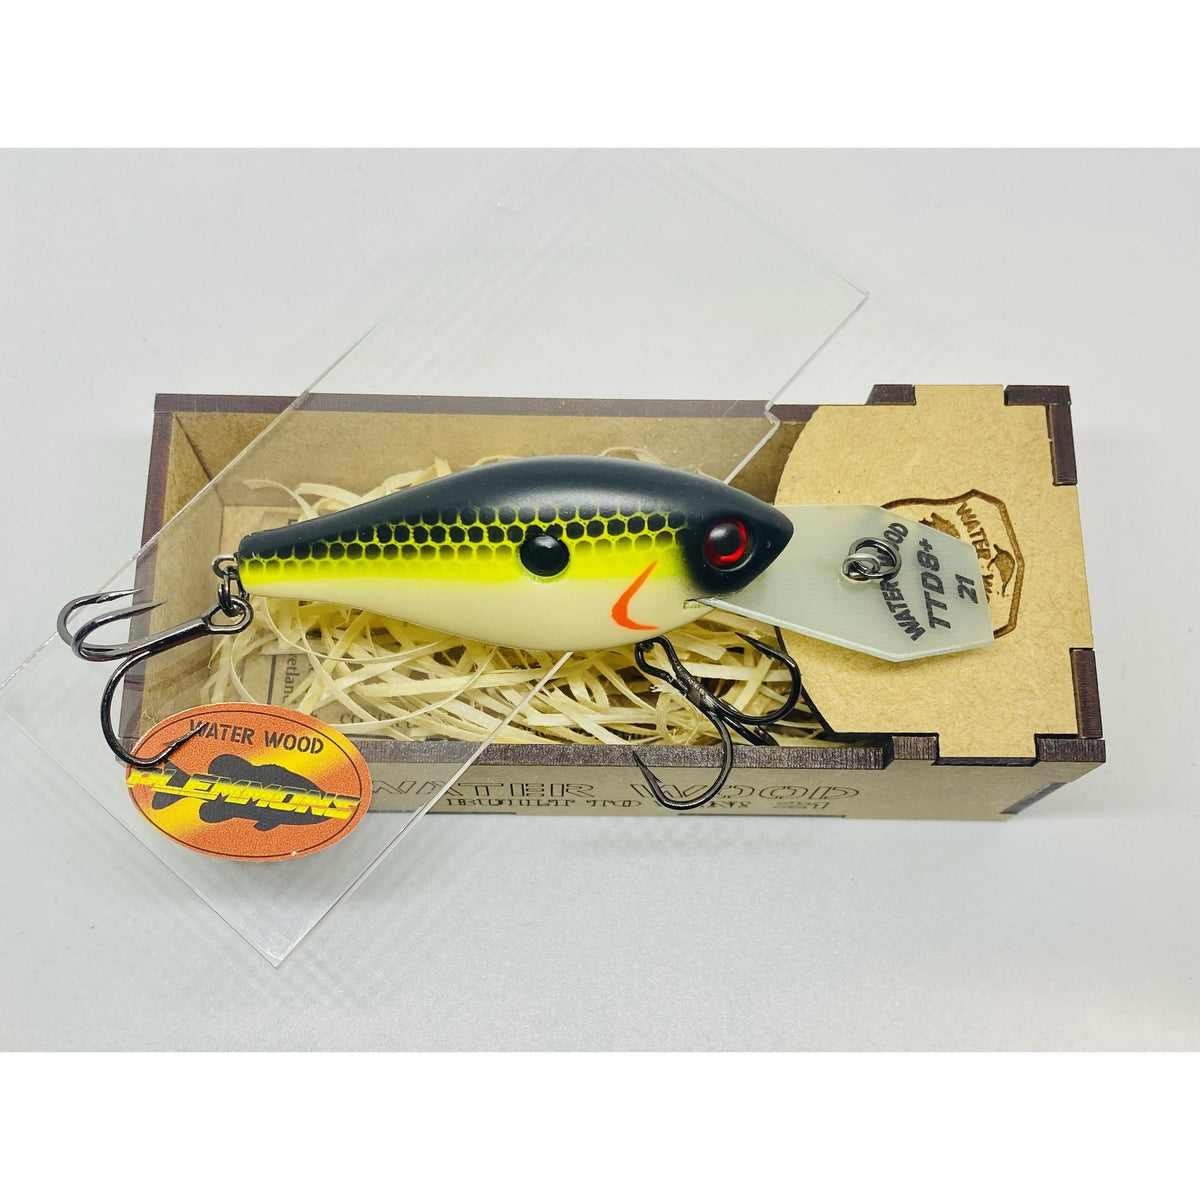 Water Wood Triple Trap 8+ SMS – Custom Tackle Supply